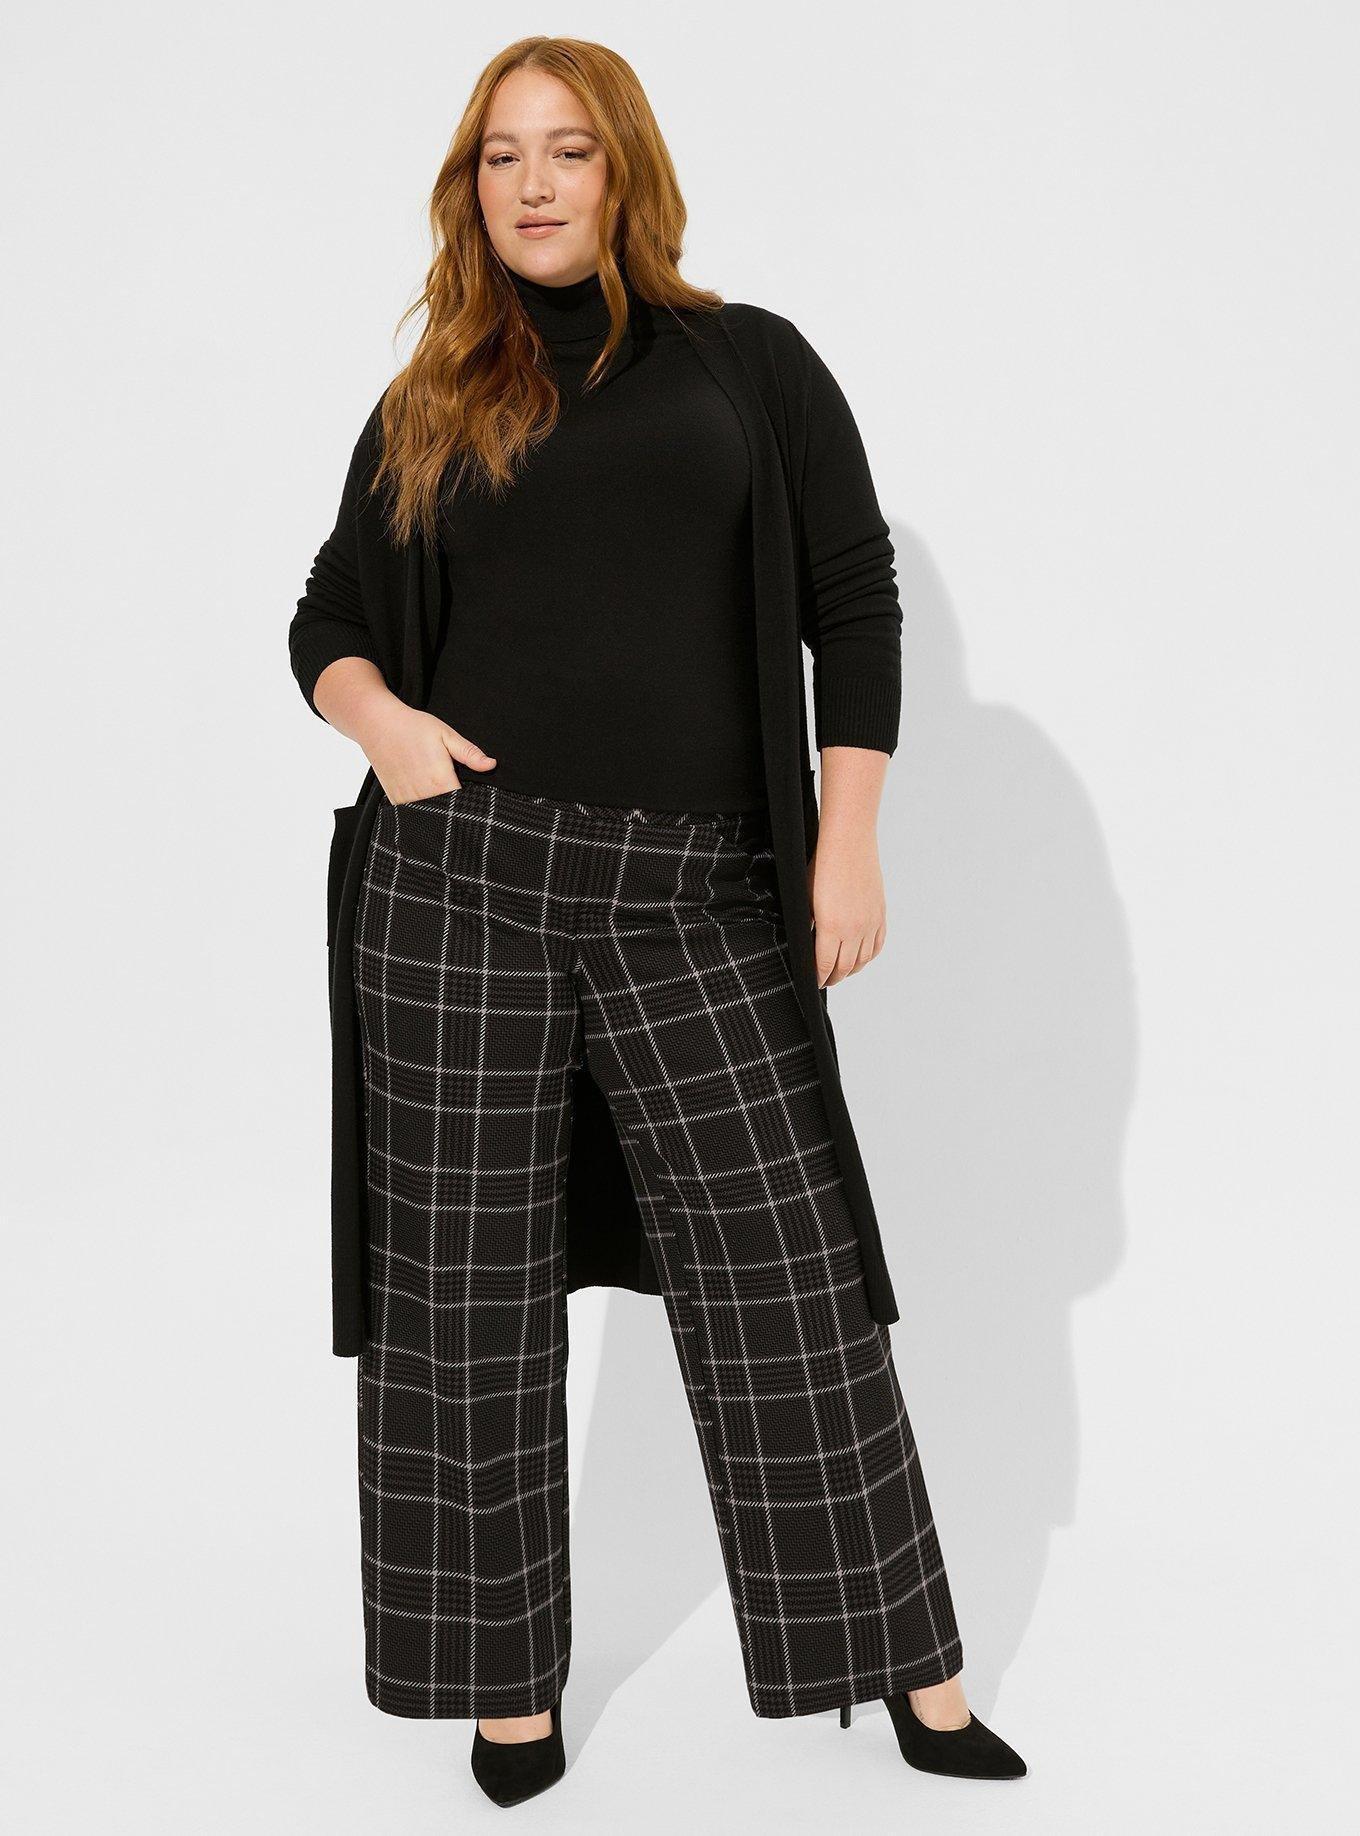 Pocket Pixie Flare Studio Luxe Ponte High-Rise Pant  Bottom clothes, High  rise pants, Black pants outfit dressy classy